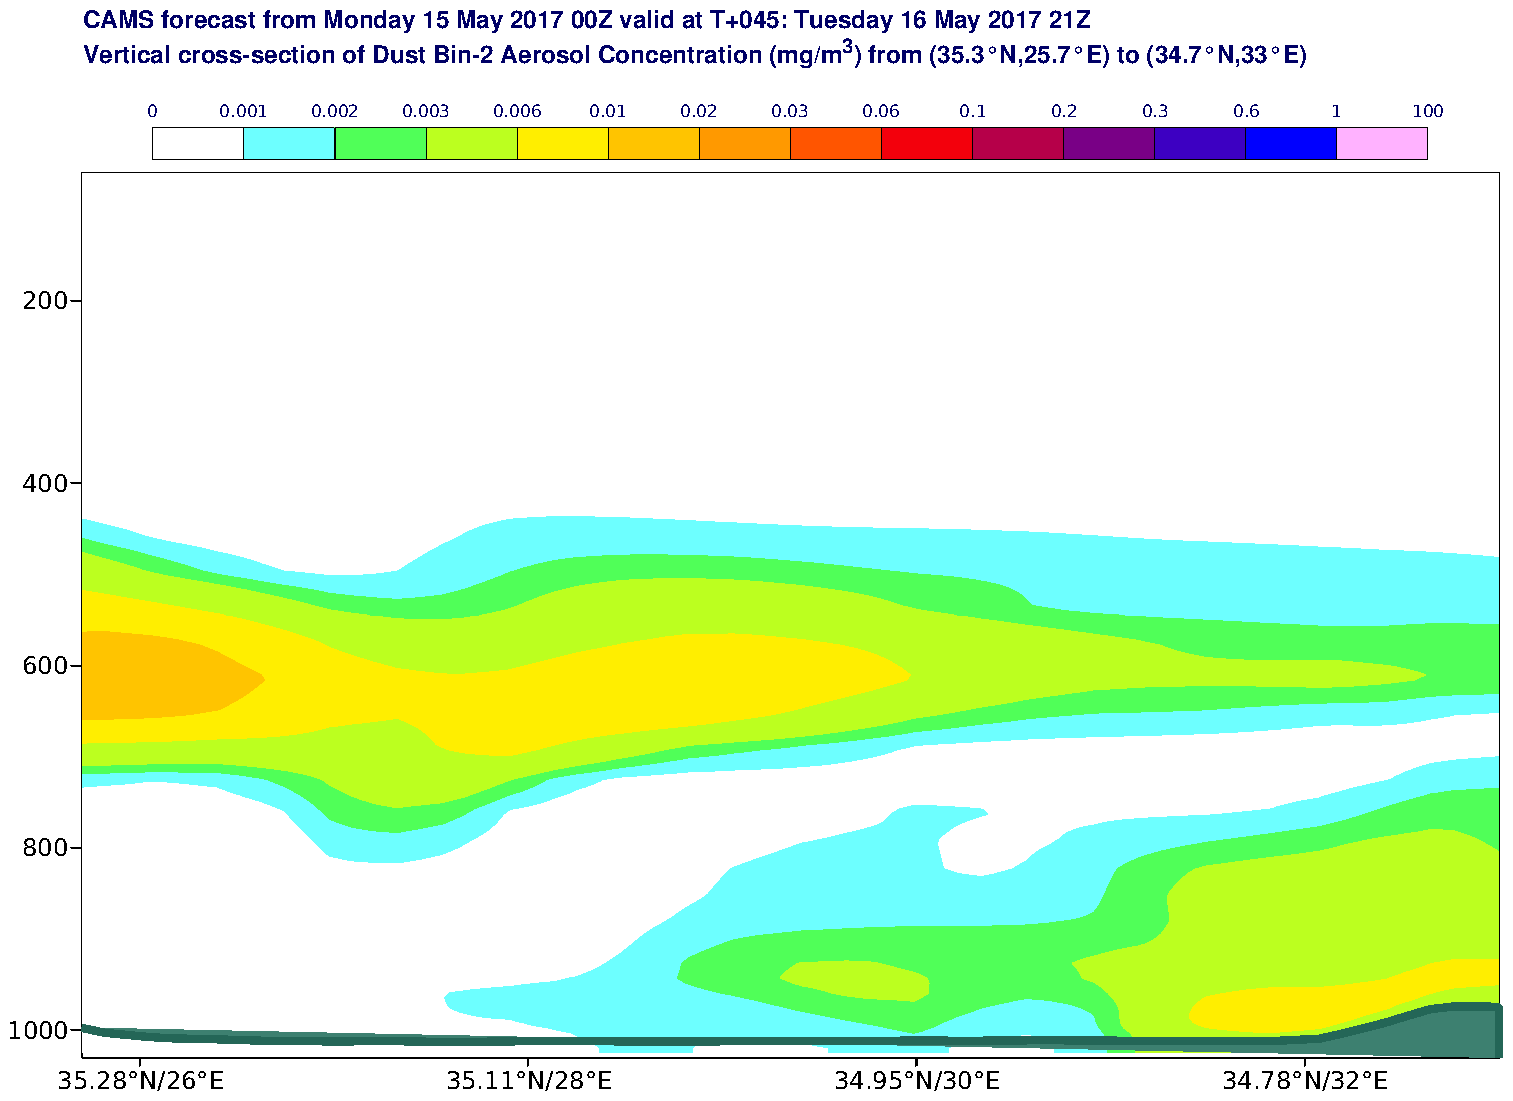 Vertical cross-section of Dust Bin-2 Aerosol Concentration (mg/m3) valid at T45 - 2017-05-16 21:00